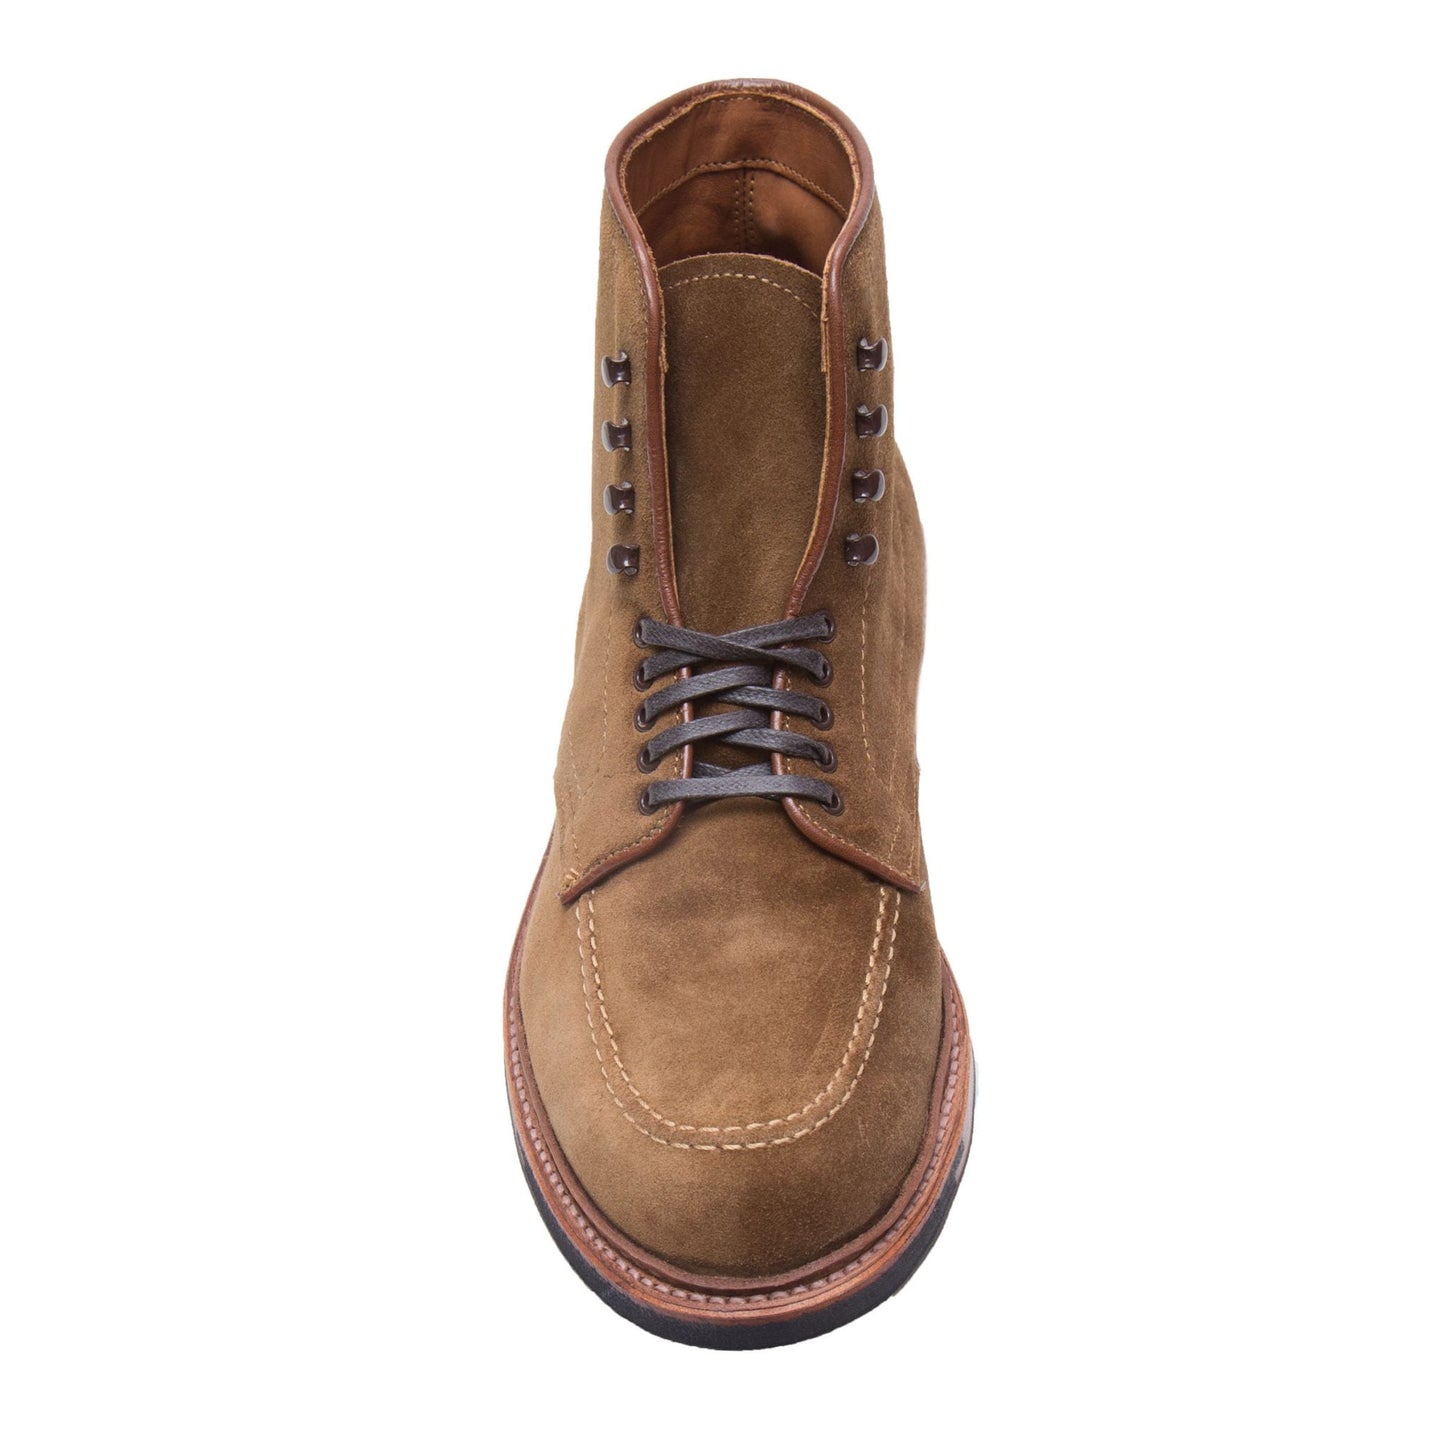 4011HC - Indy Boot in Snuff Suede